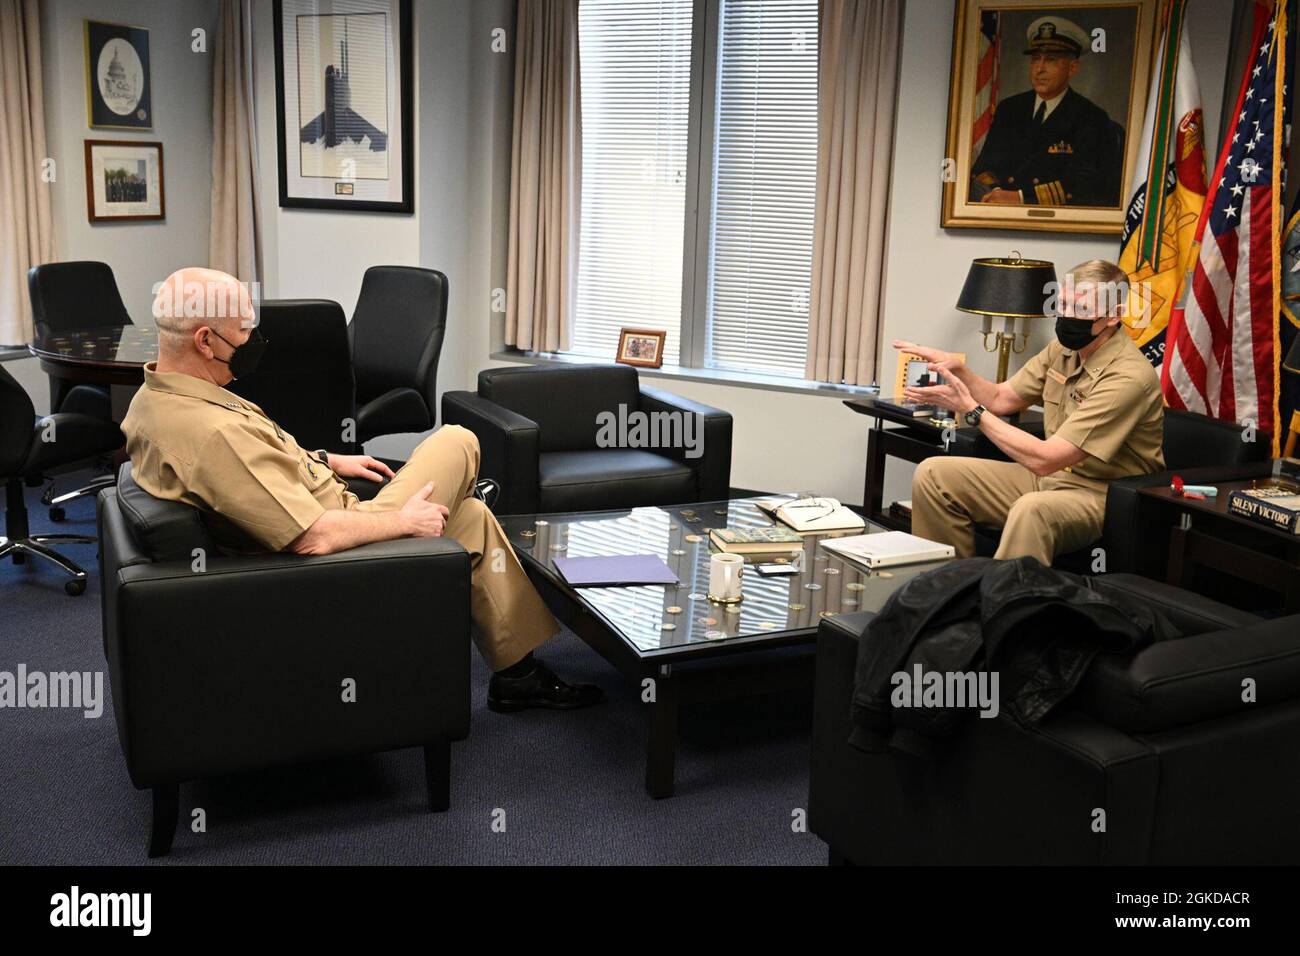 210319-N-UH269-021 ARLINGTON, Va. (March 19, 2021) Adm. Christopher W. Grady, commander of U.S. Fleet Forces Command, talks with Rear Adm. Lorin Selby, chief of naval research, during a visit to the Office of Naval Research (ONR) in Arlington, Virginia. While at ONR, Grady was briefed on the current and emerging technologies the Naval Research Enterprise is providing the fleet and force. Stock Photo